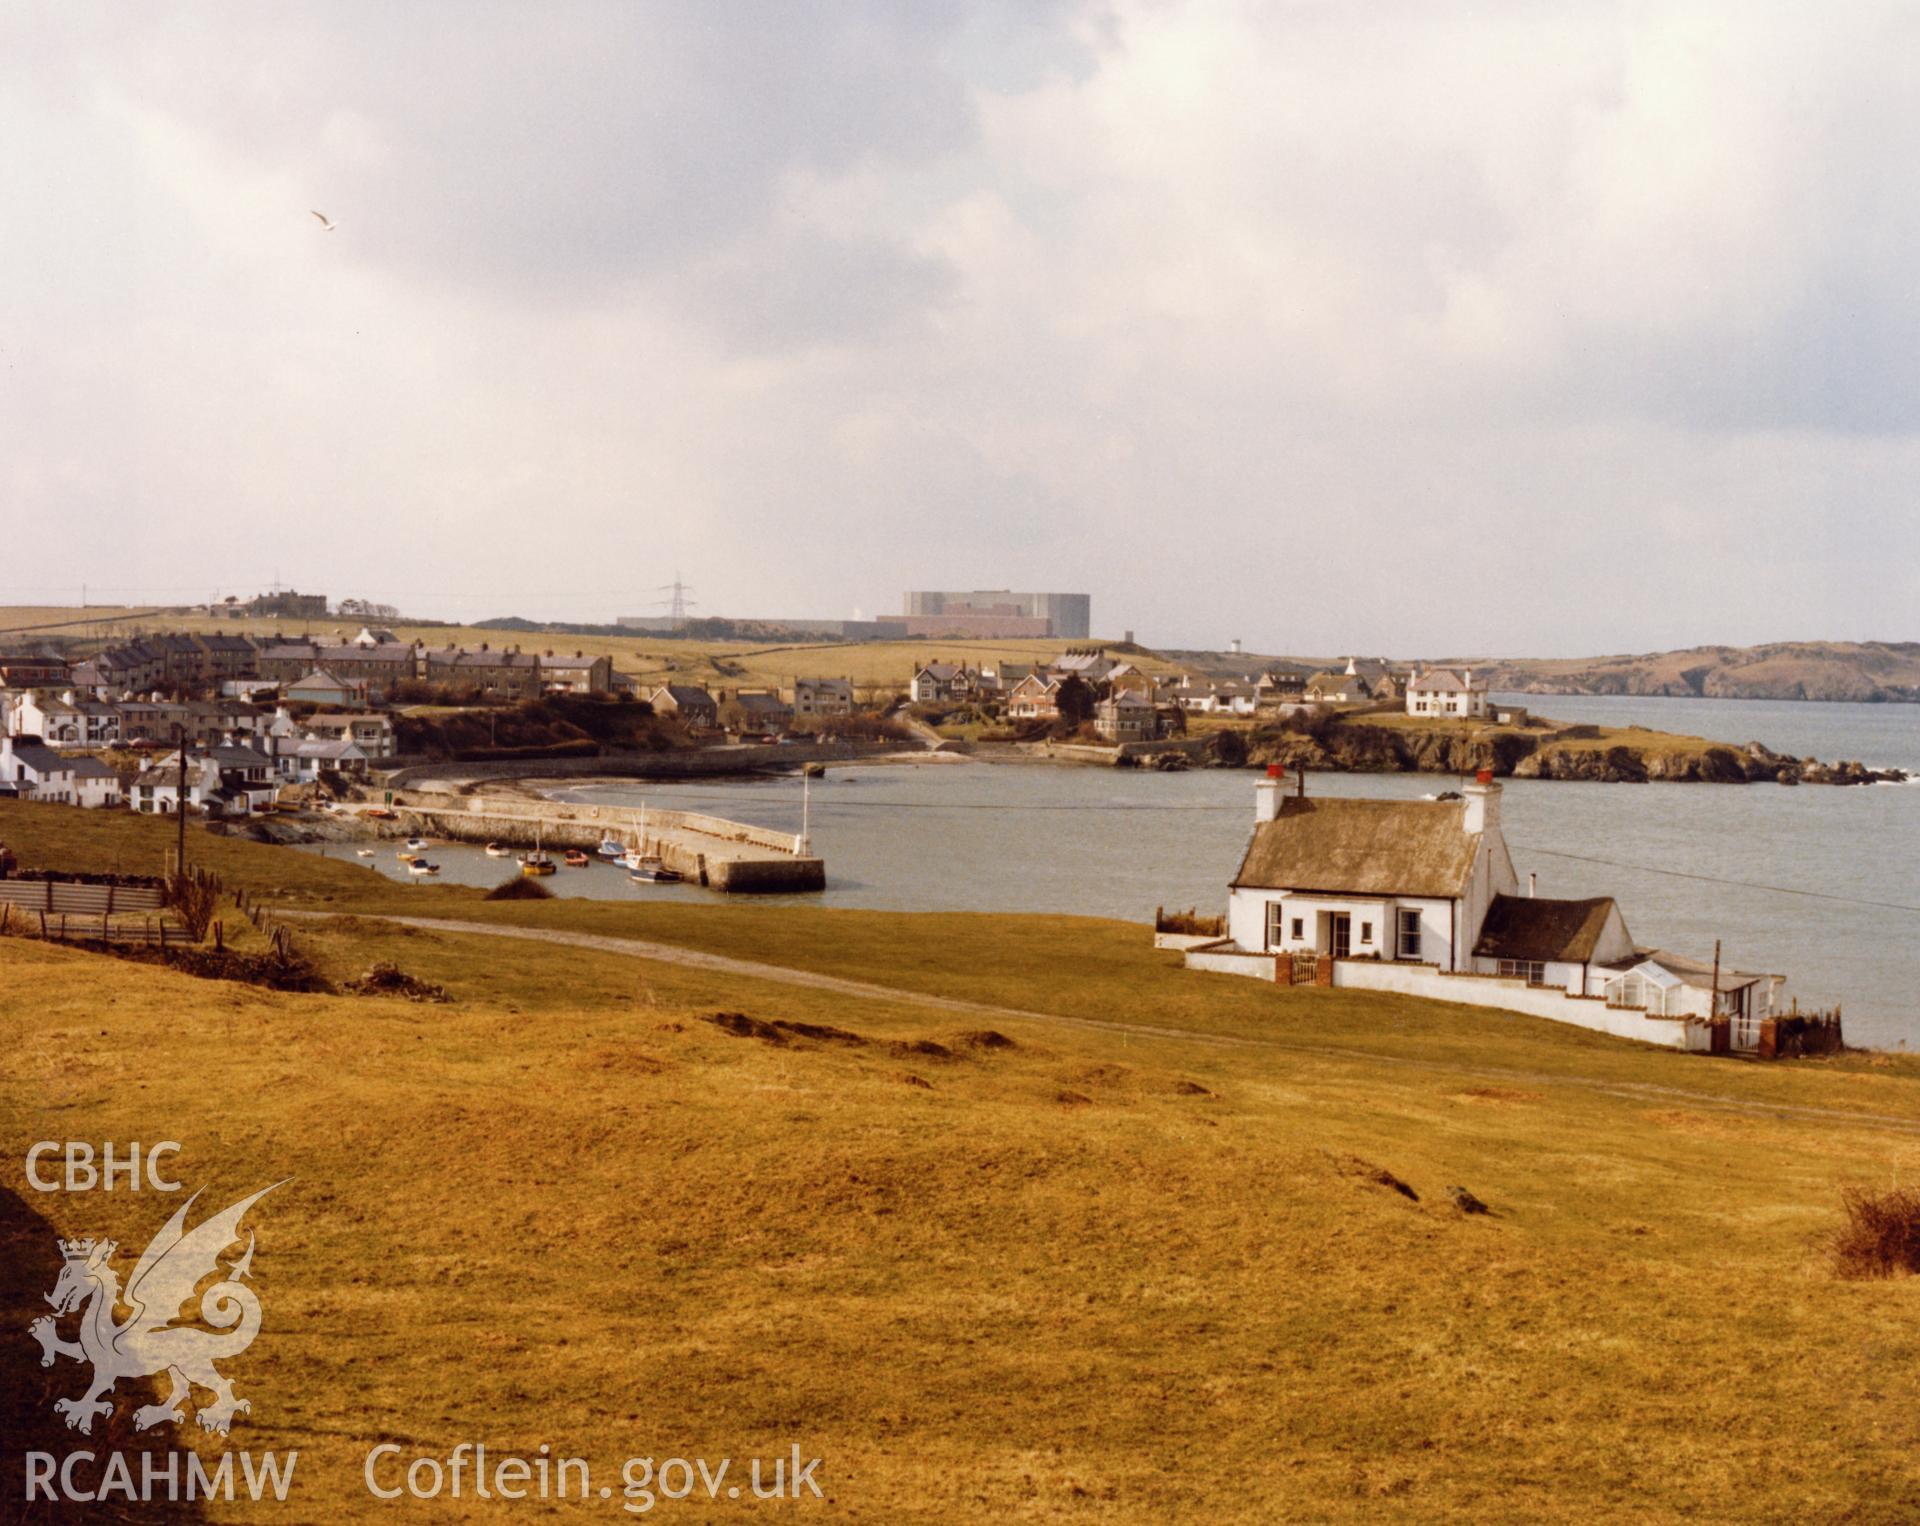 1 b/w print showing distant view of Wylfa Power Station with the village of Cemaes in the foreground; collated by the former Central Office of Information.